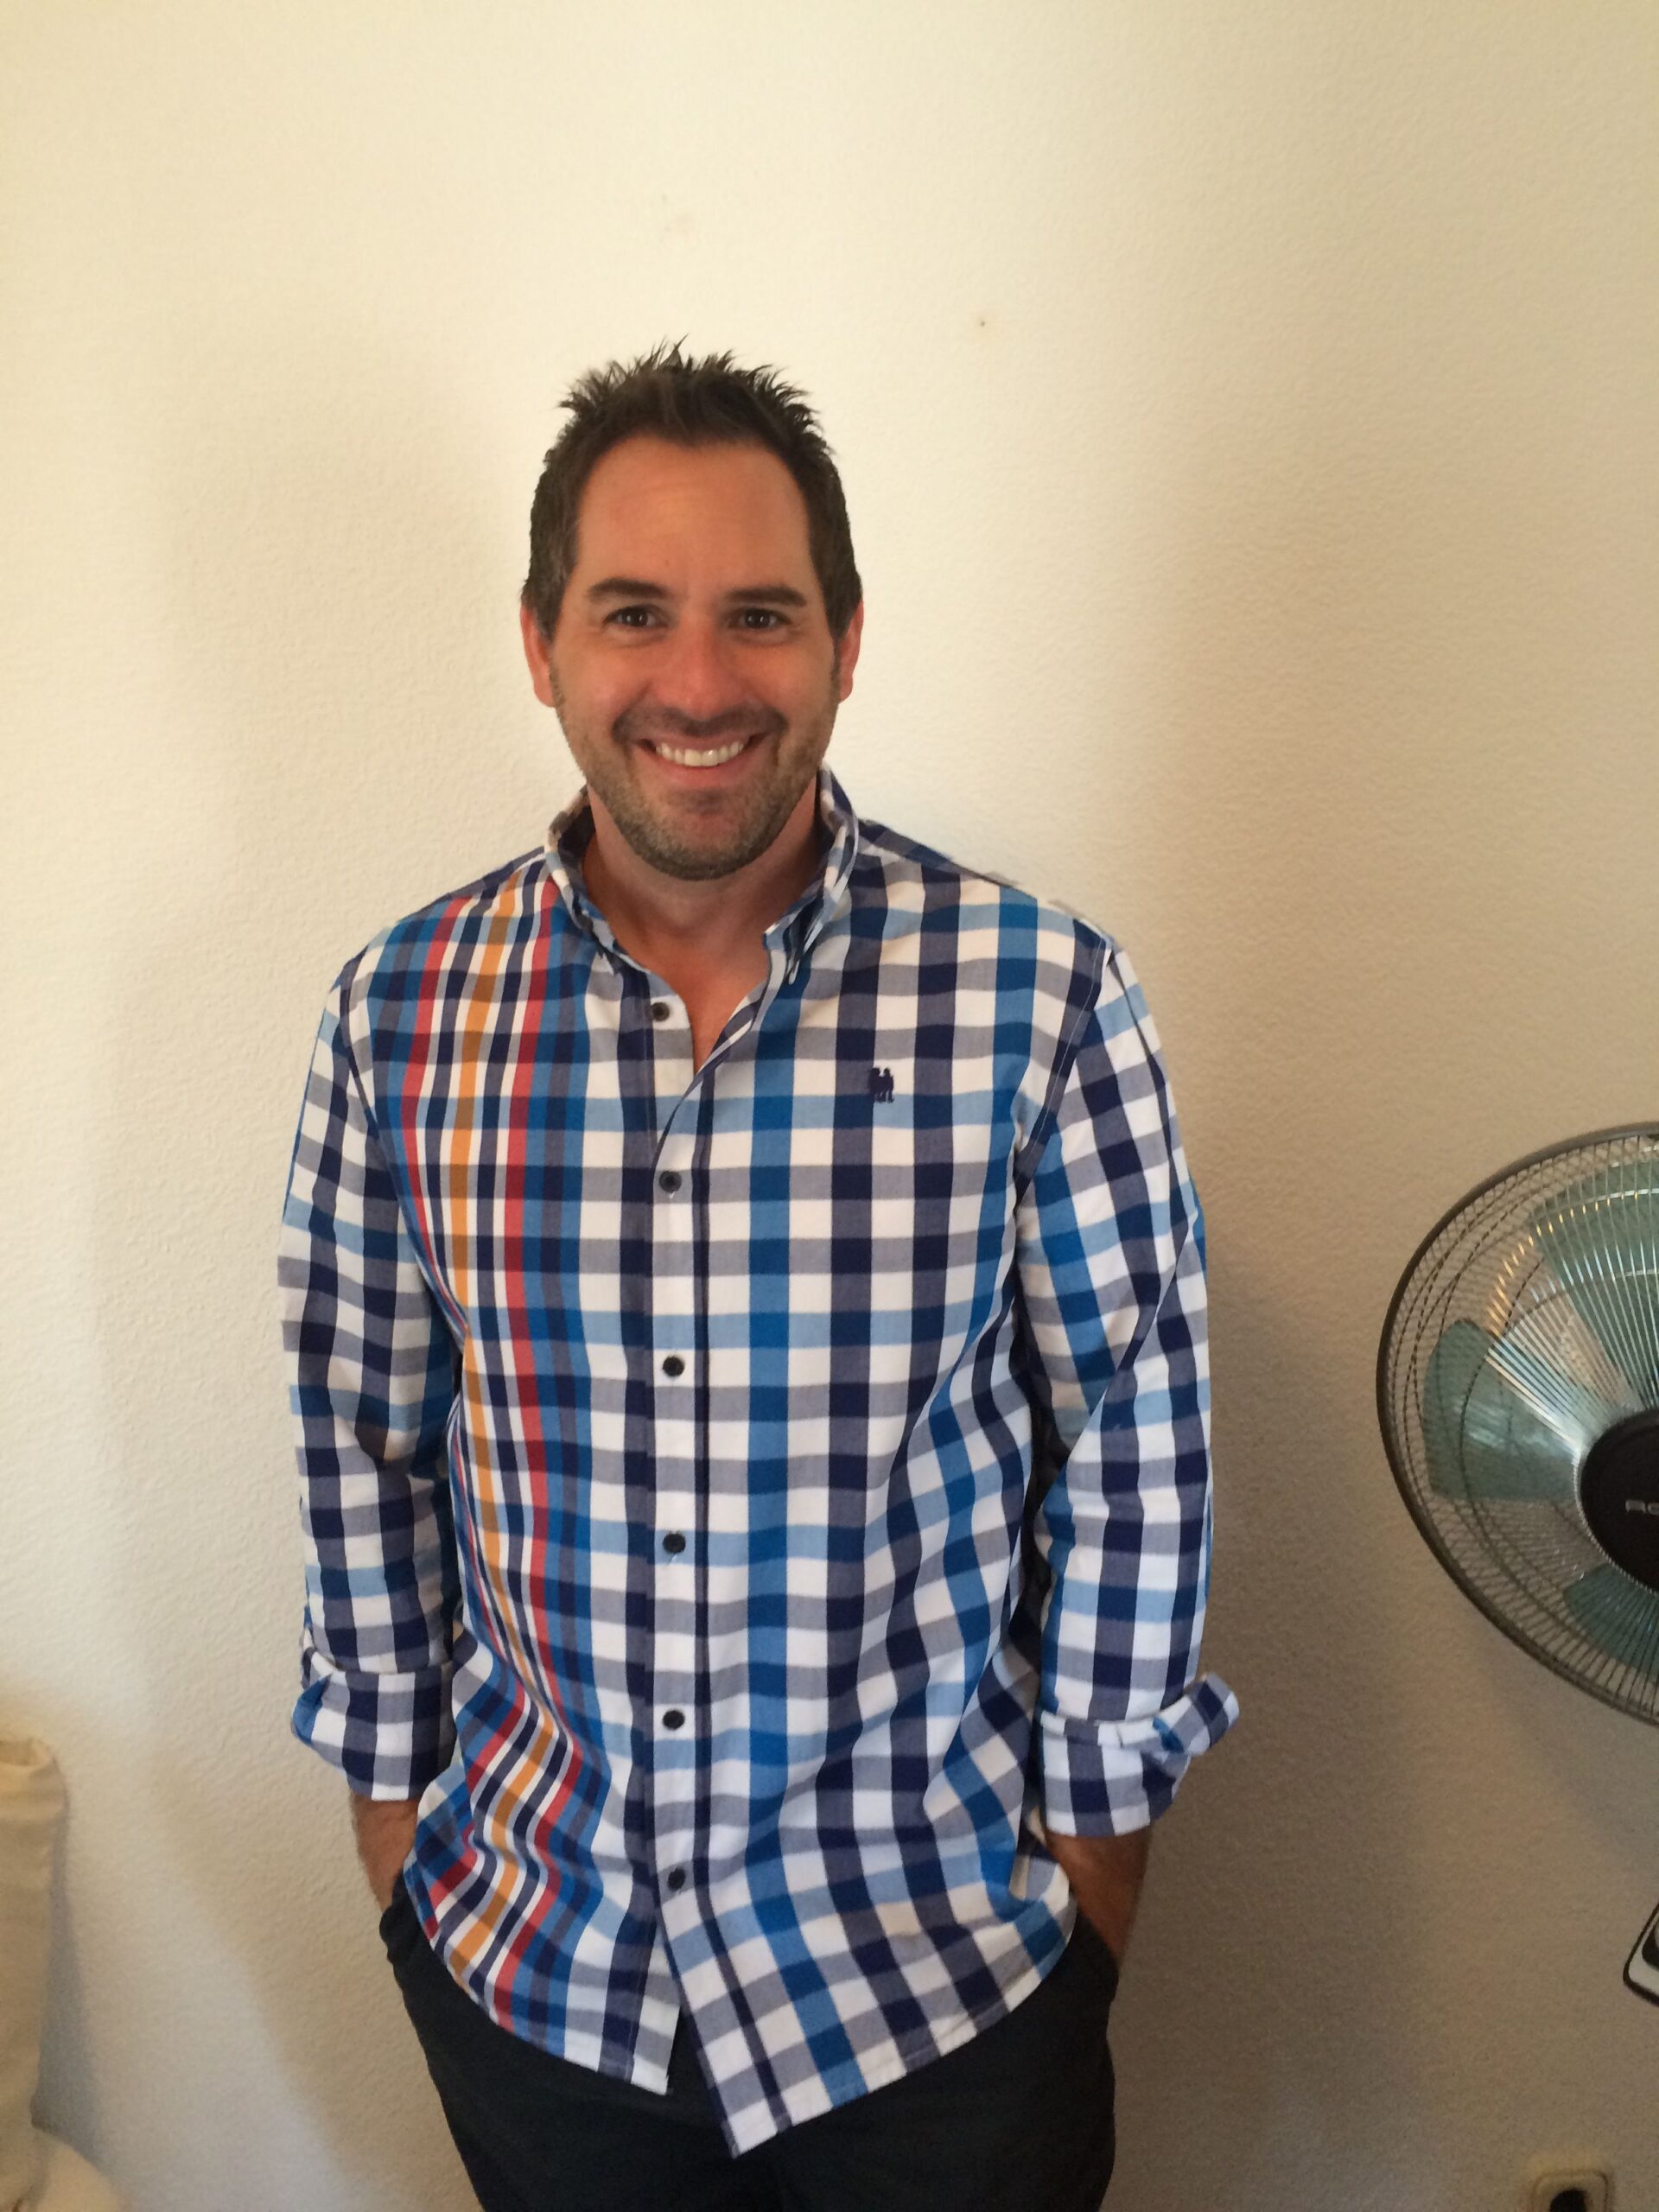 Todd Spaits of Yanks Cash is this Week’s Guest on Adult Site Broker Talk